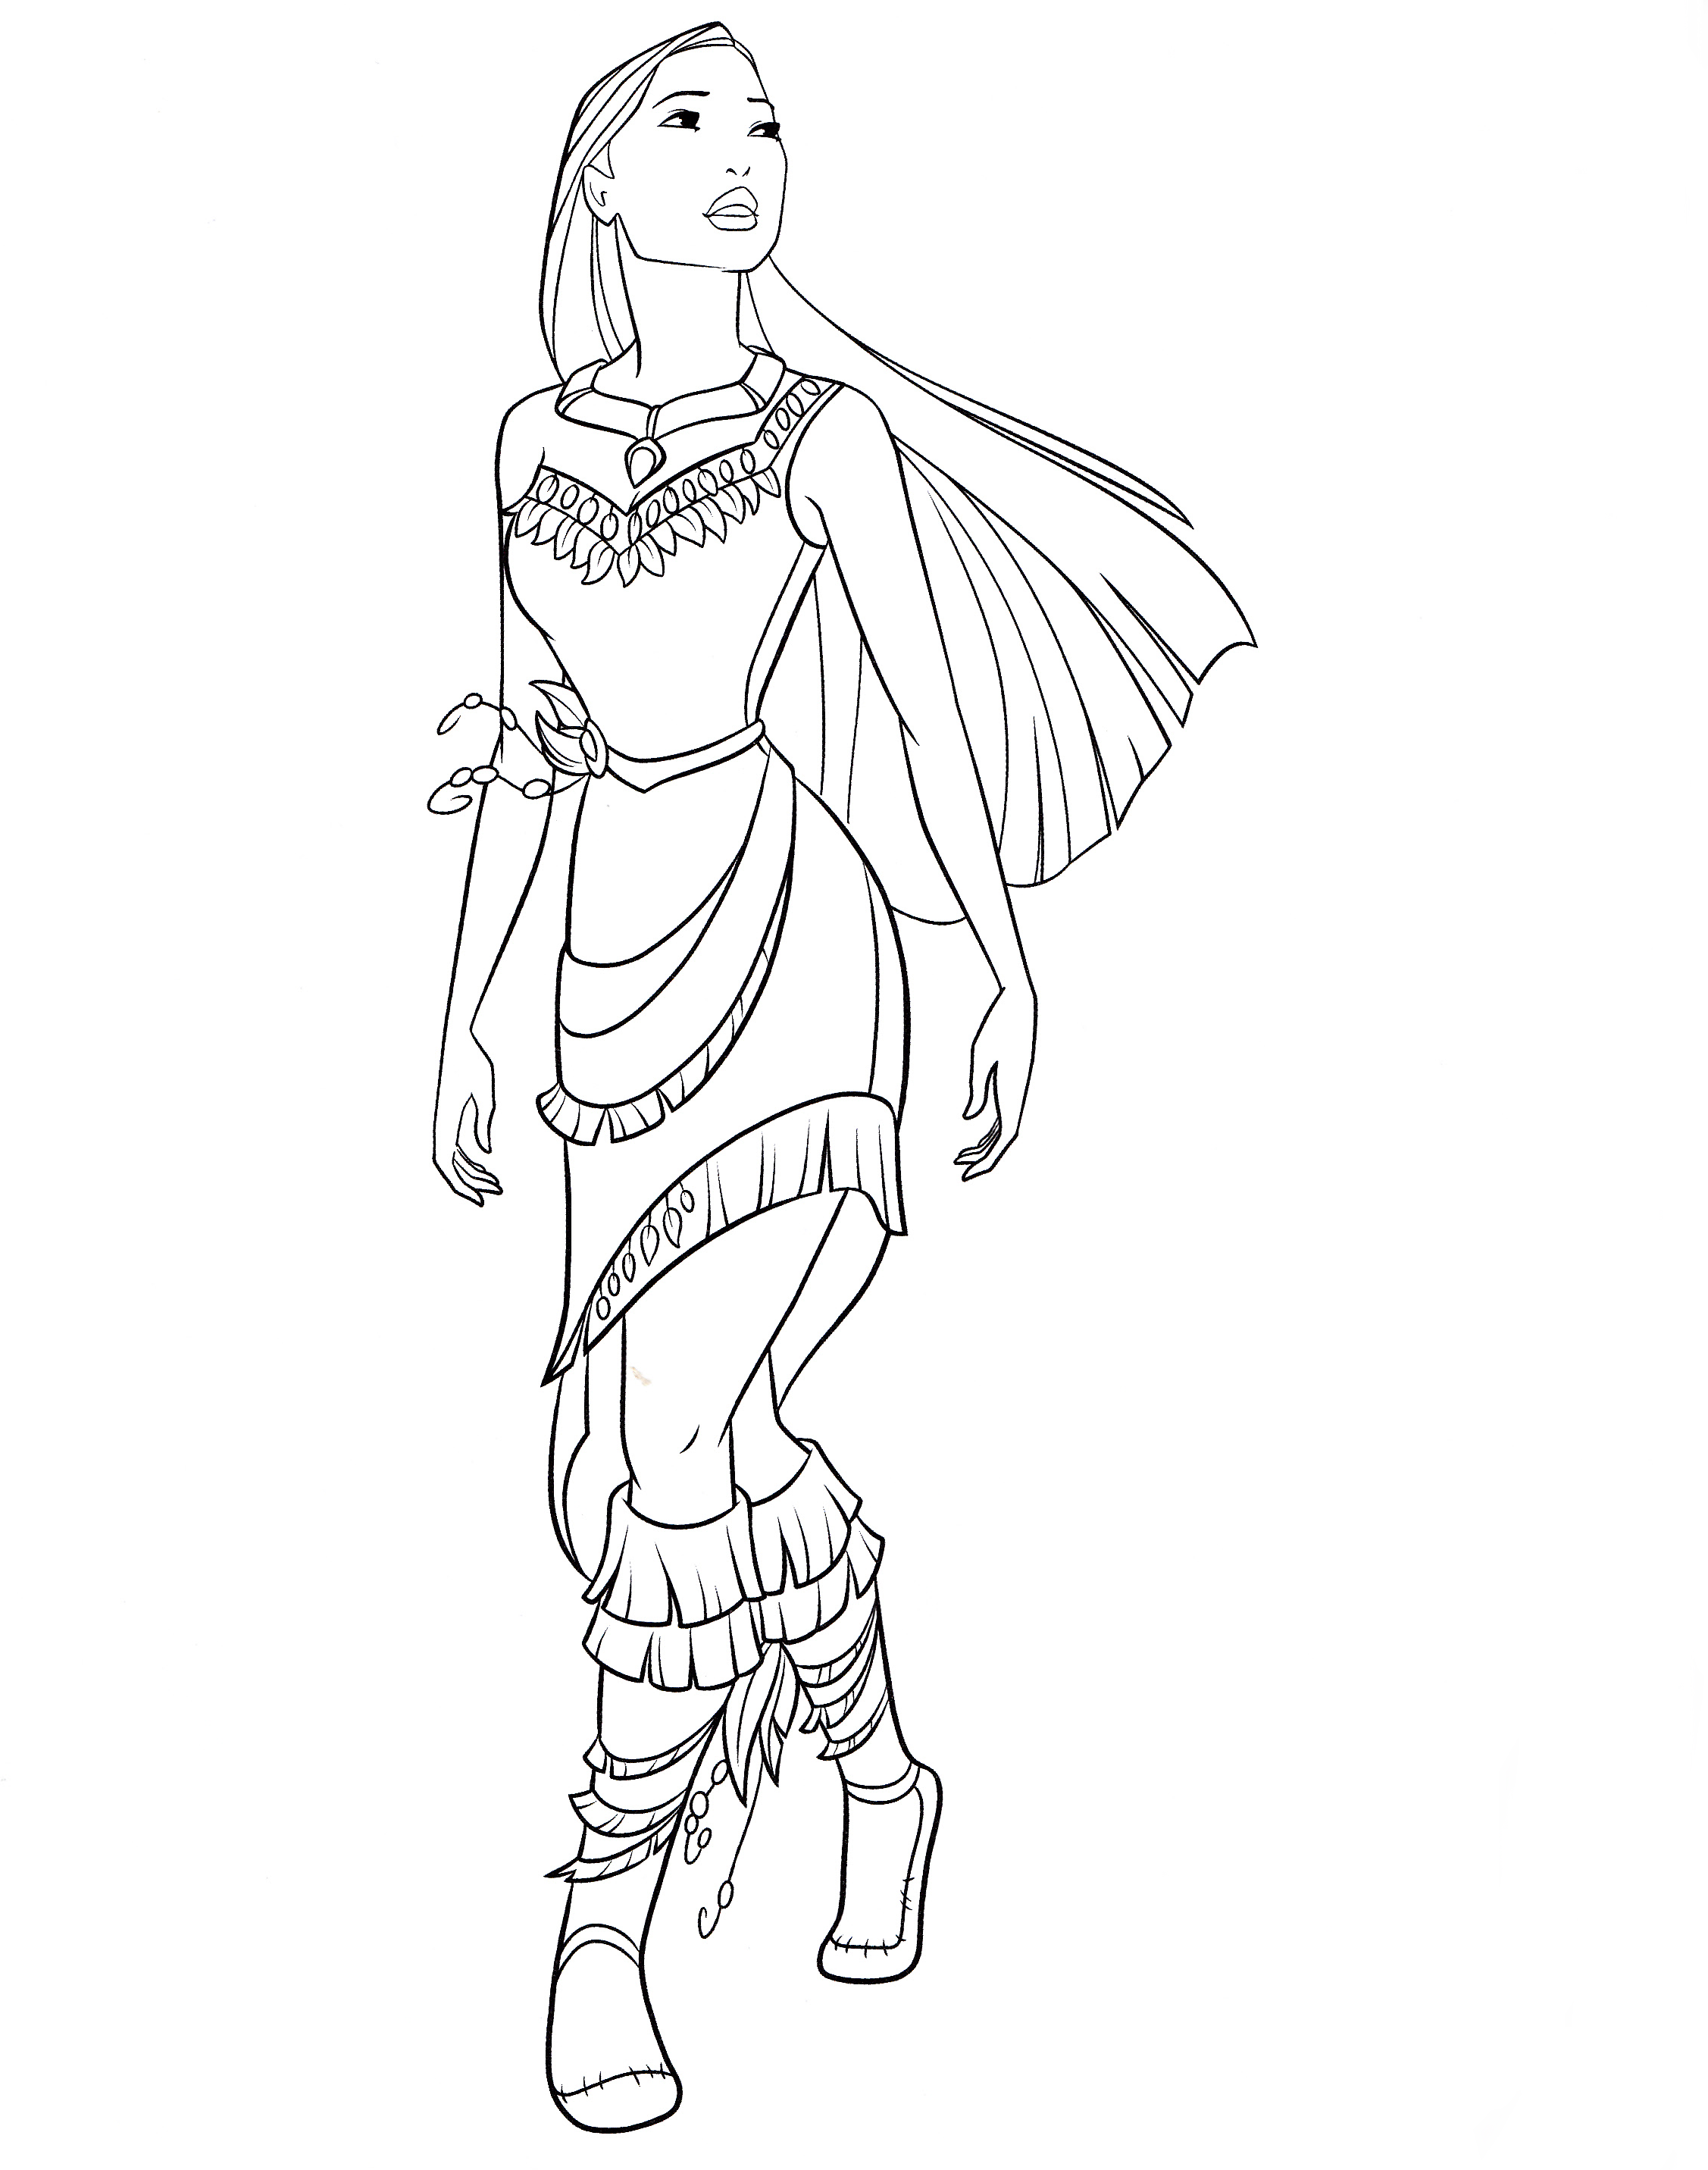 Pocahontas From Disney Coloring Pages   Pocahontas Coloring Pages ...